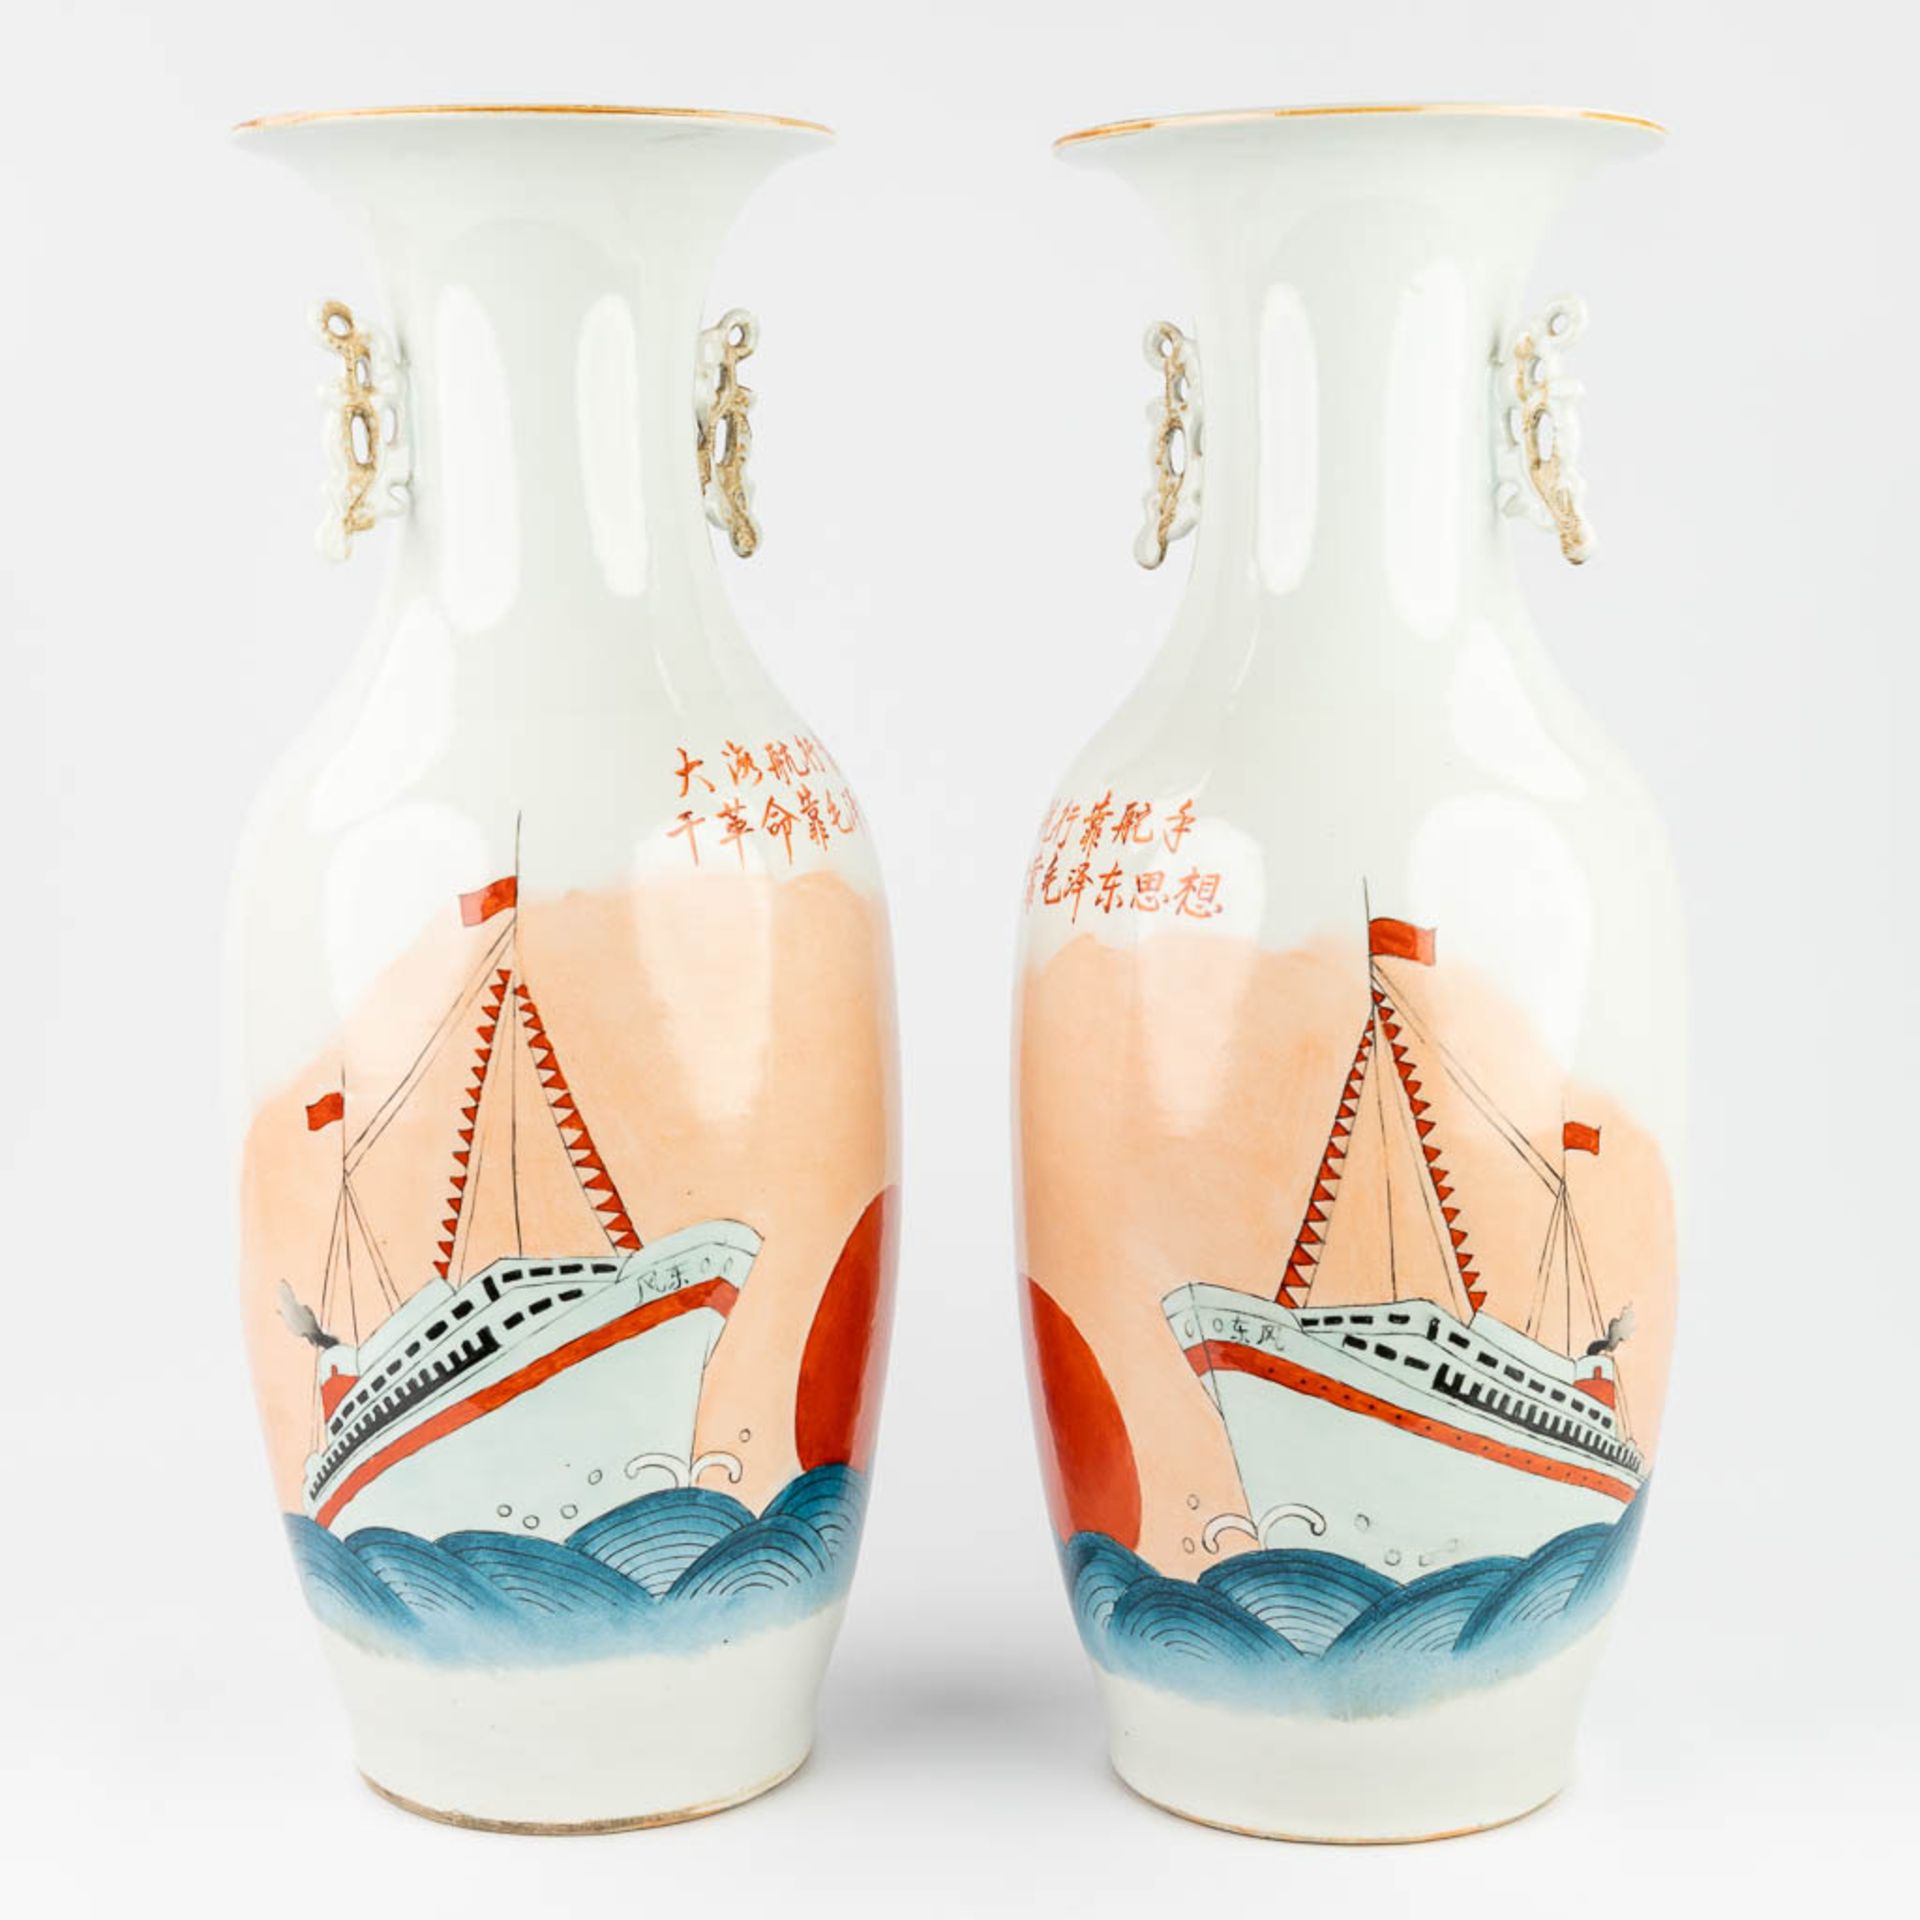 A pair of Chinese vases made of glazed porcelain, and decorated with ships (59,5 x 23 cm) - Image 10 of 14